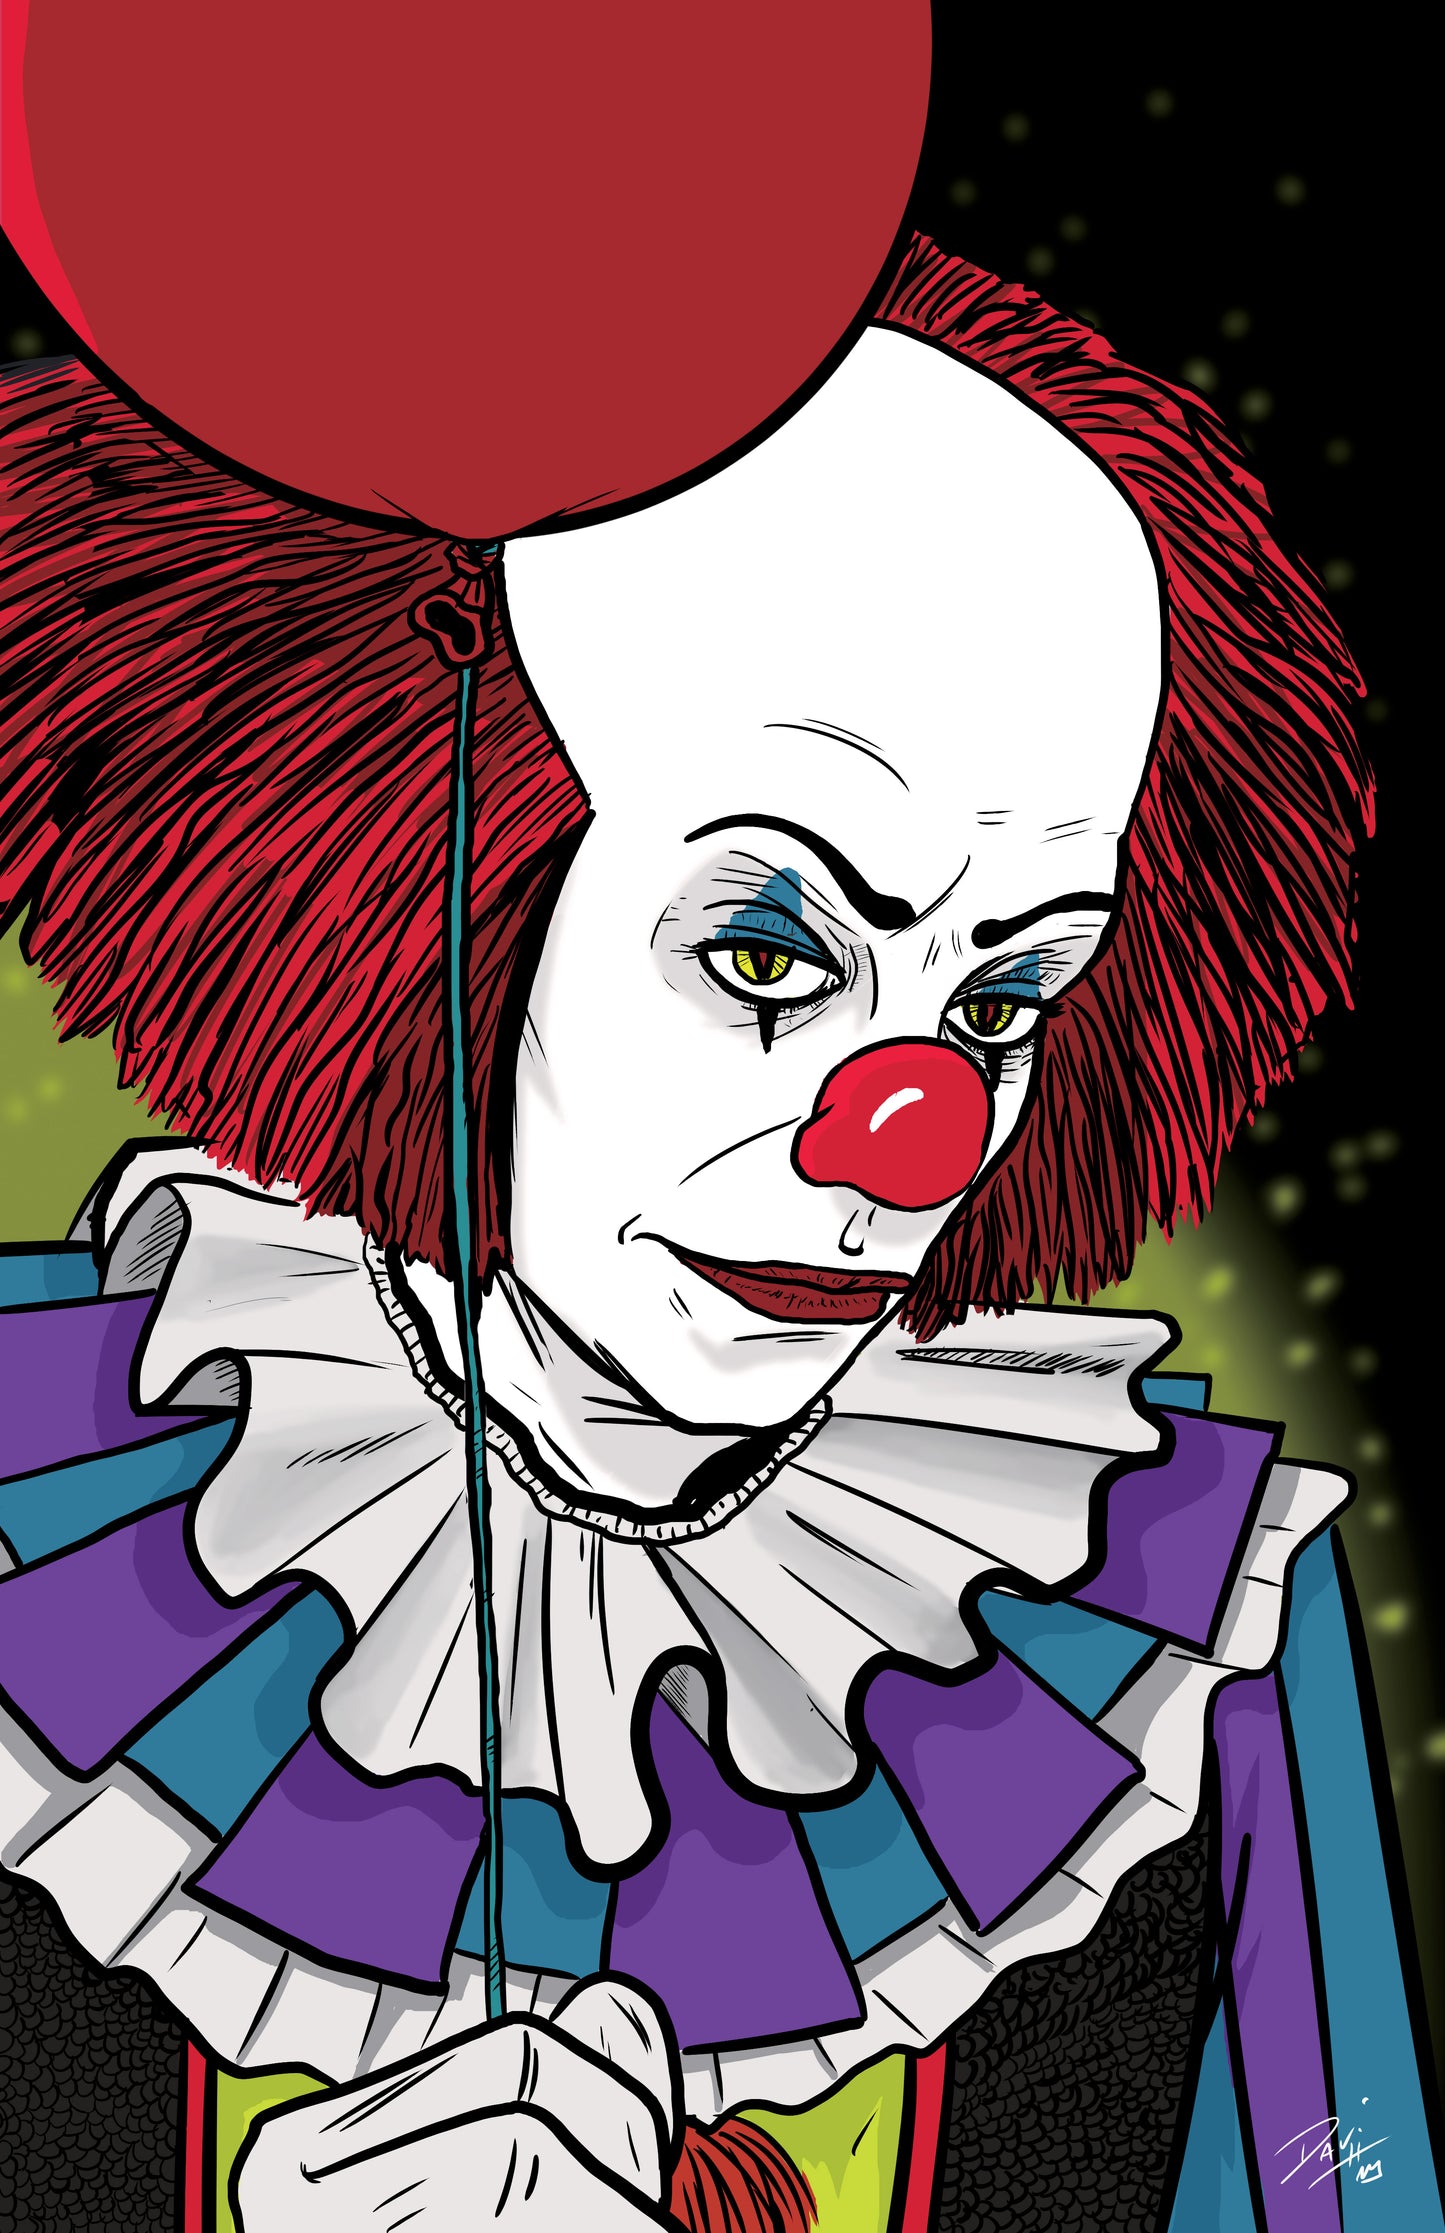 Pennywise - IT (1990) Print